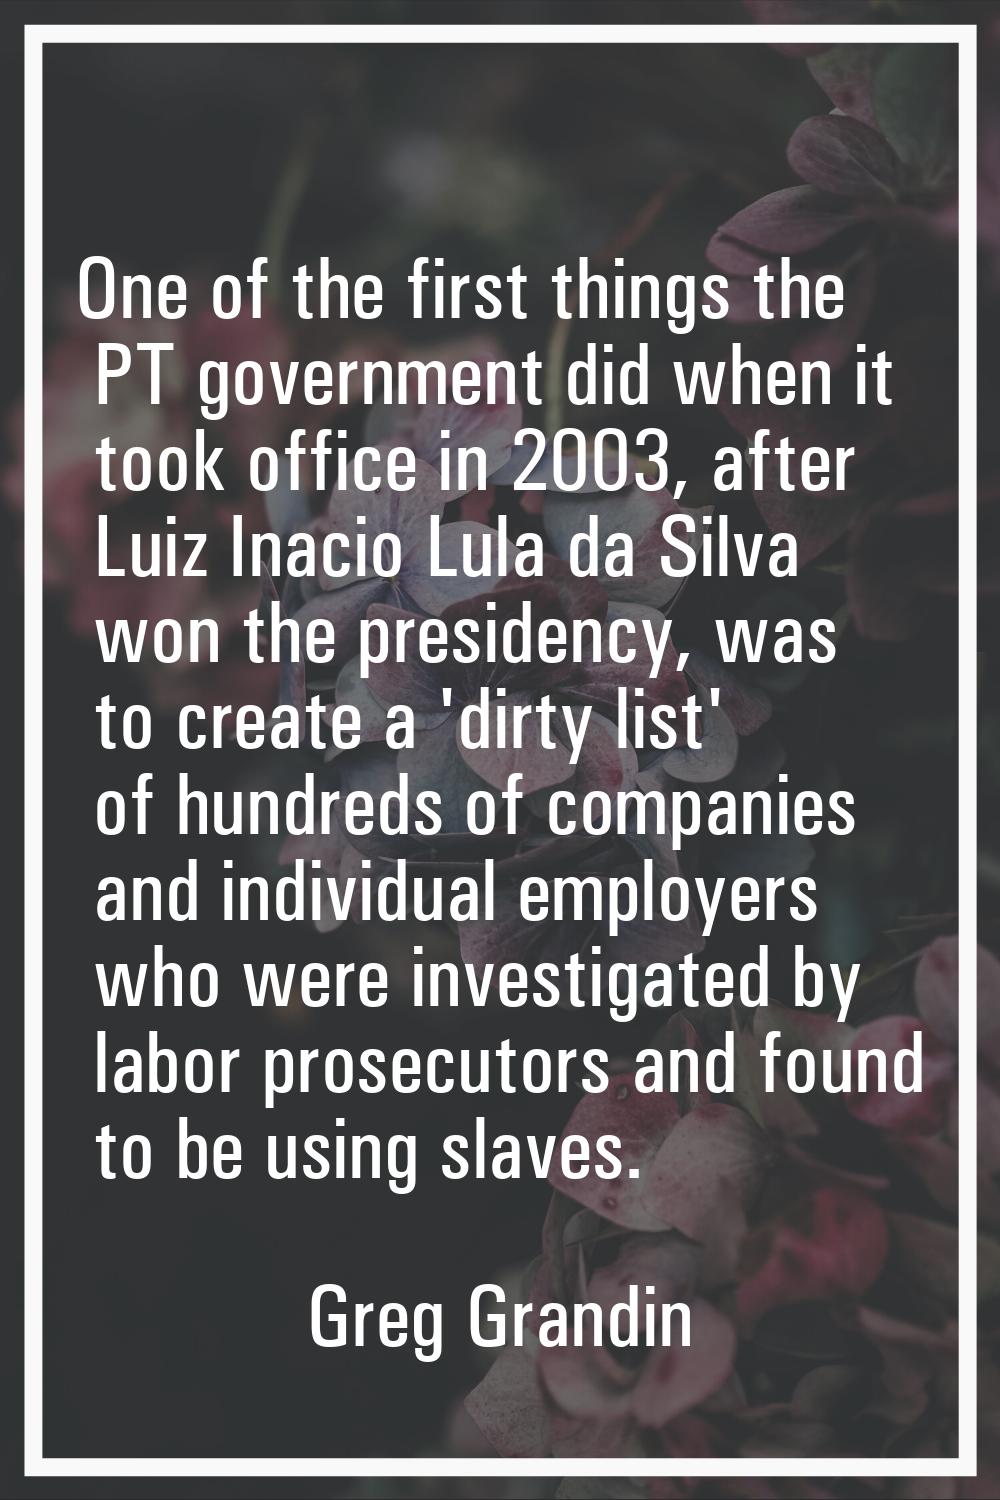 One of the first things the PT government did when it took office in 2003, after Luiz Inacio Lula d